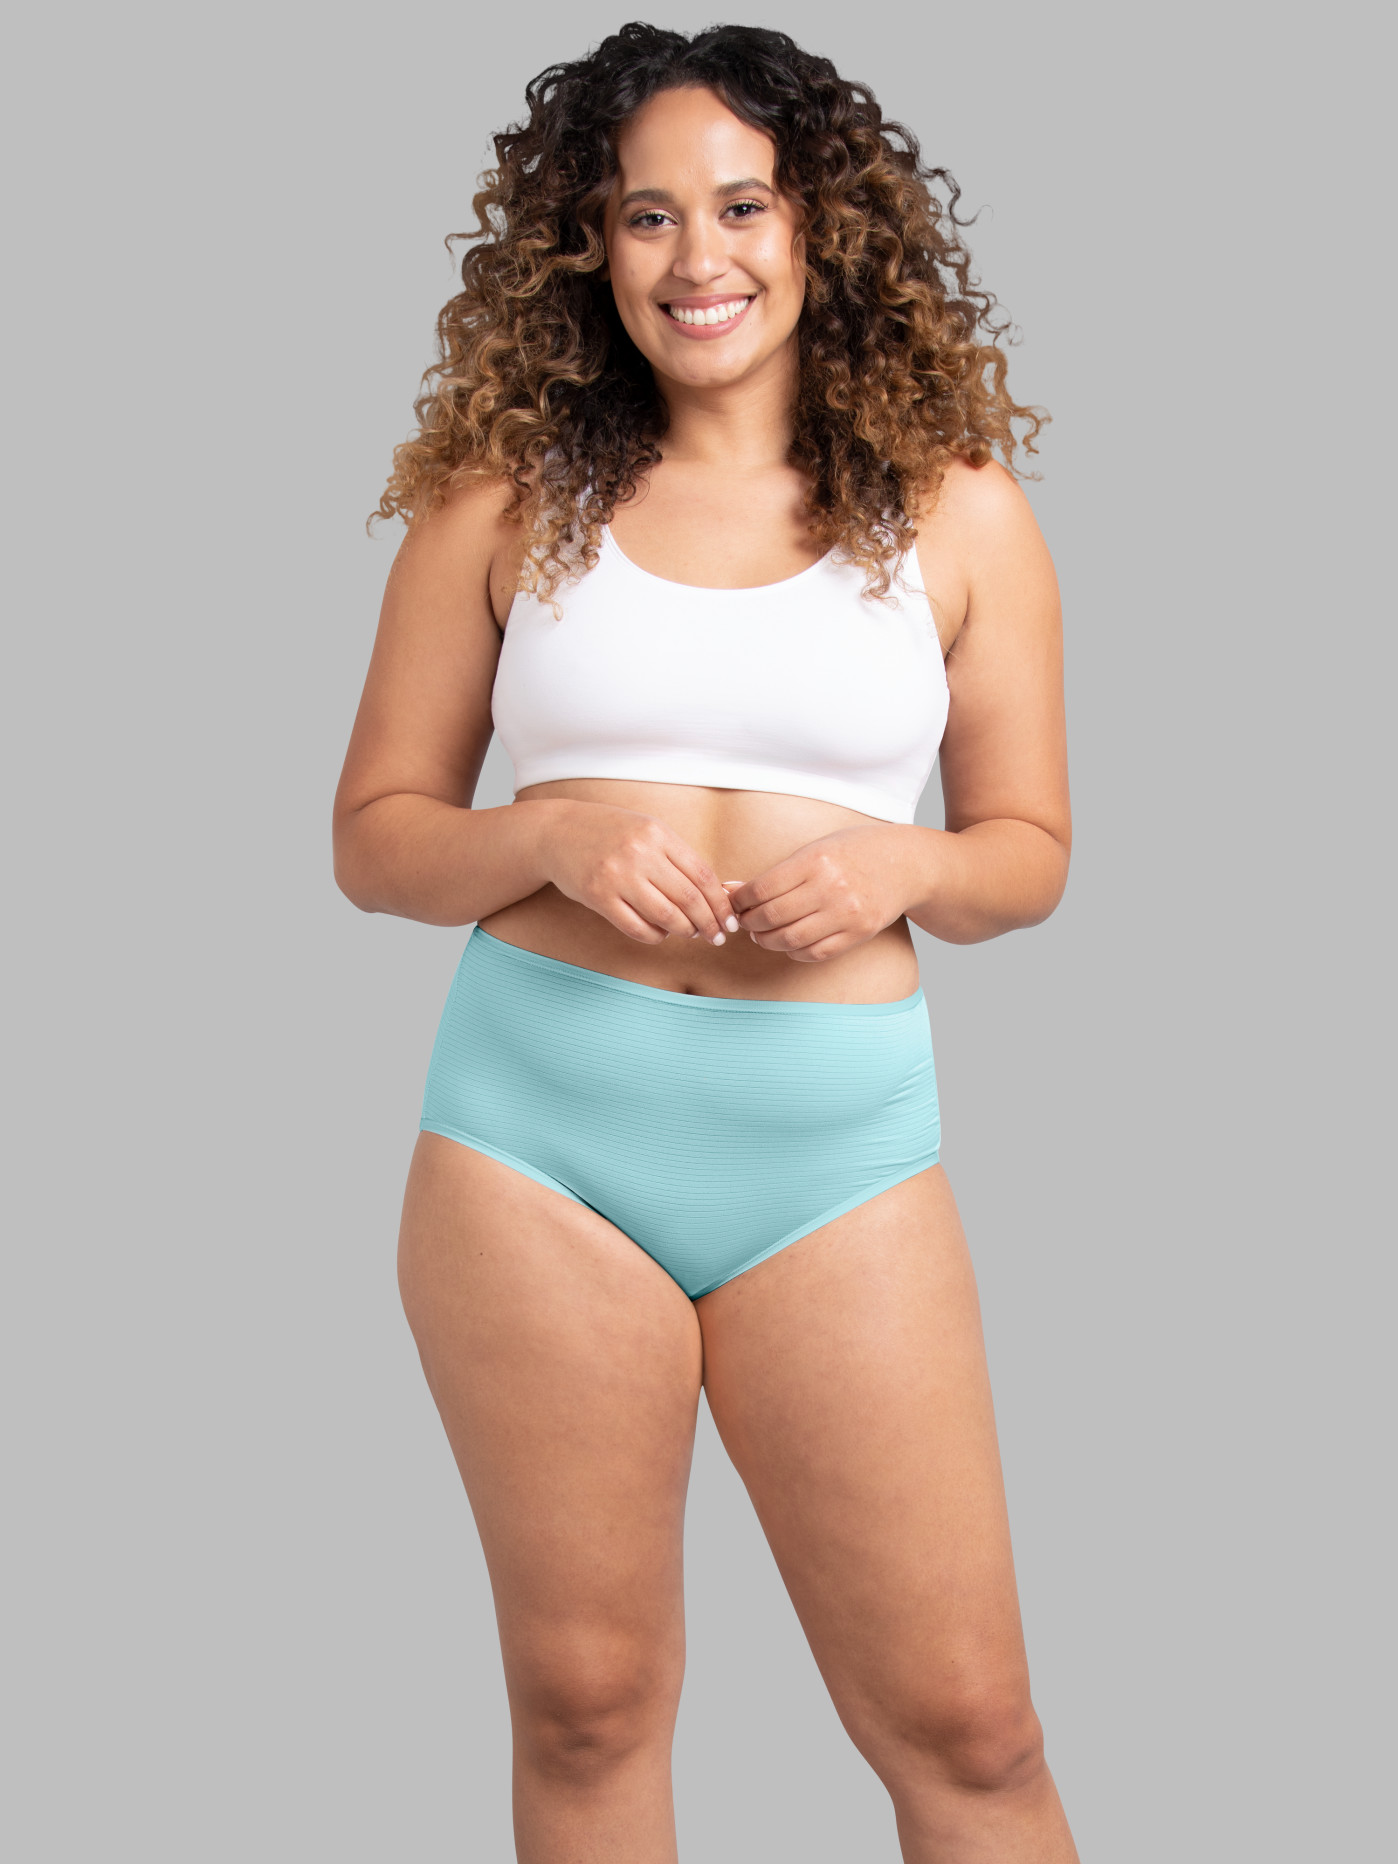 Women's Plus Fit for Me® Breathable Cooling Stripes Brief Panty